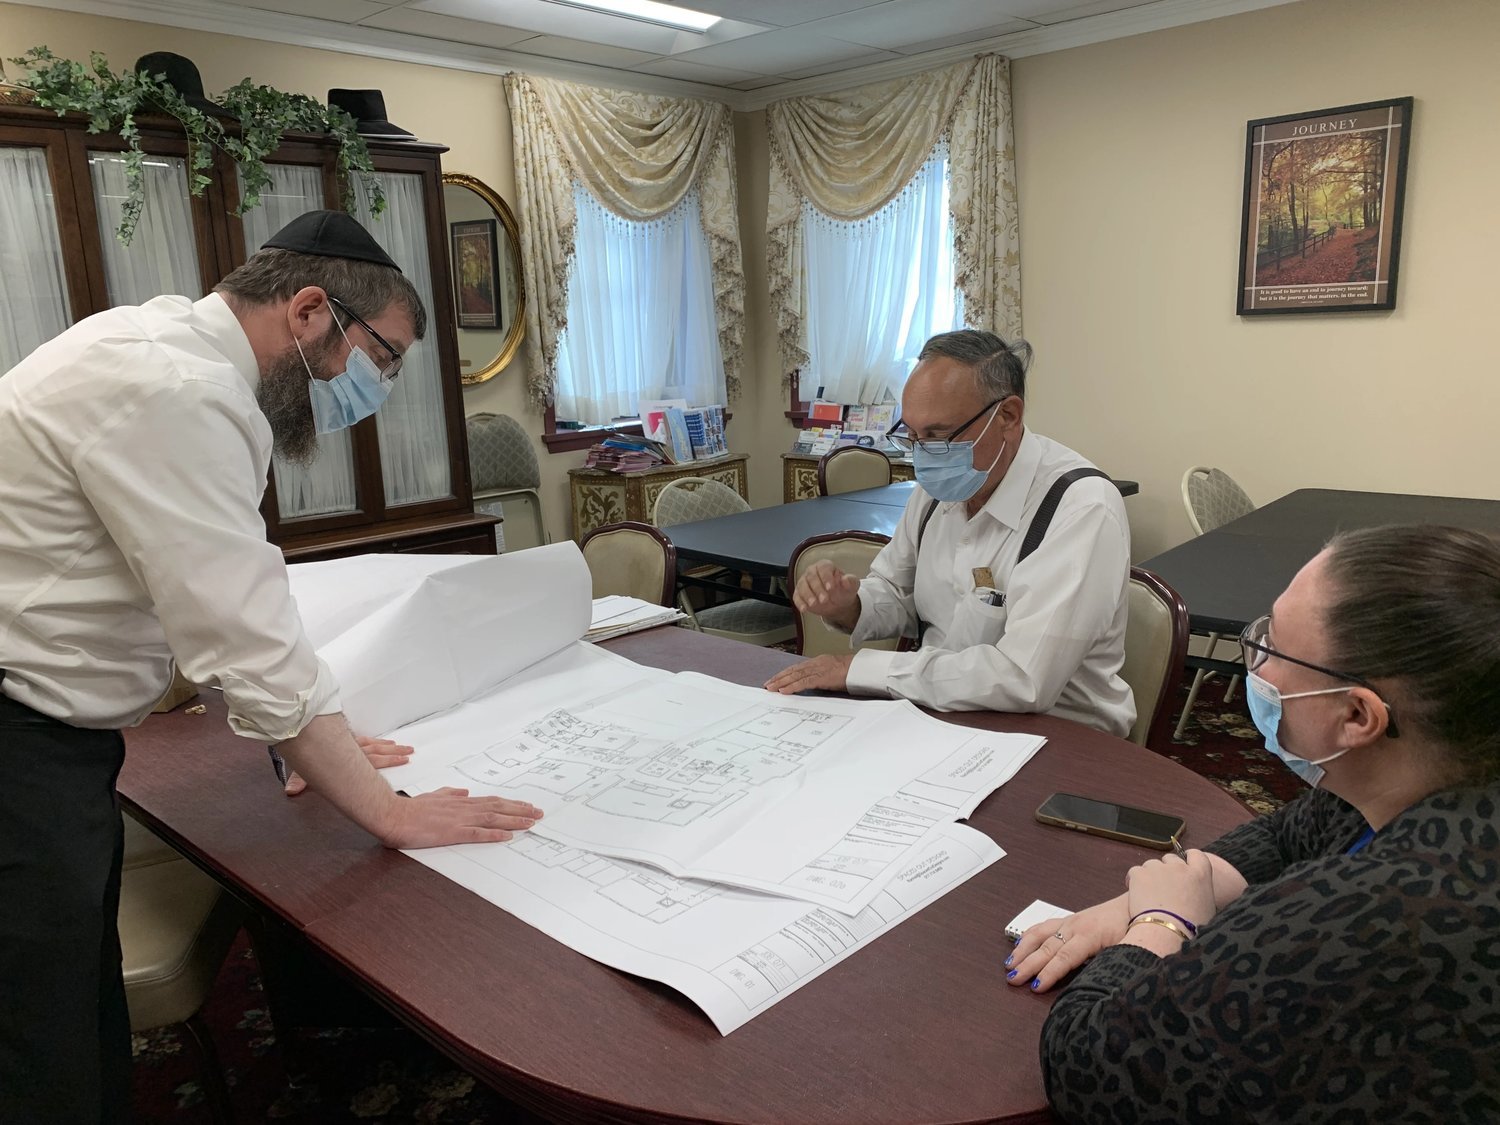 The Chabad of Merrick-Bellmore-Wantagh ran a successful campaign to raise funds for the expansion of its preschool. Above, Rabbi Shimon Kramer, left, looked over plans with an architect.